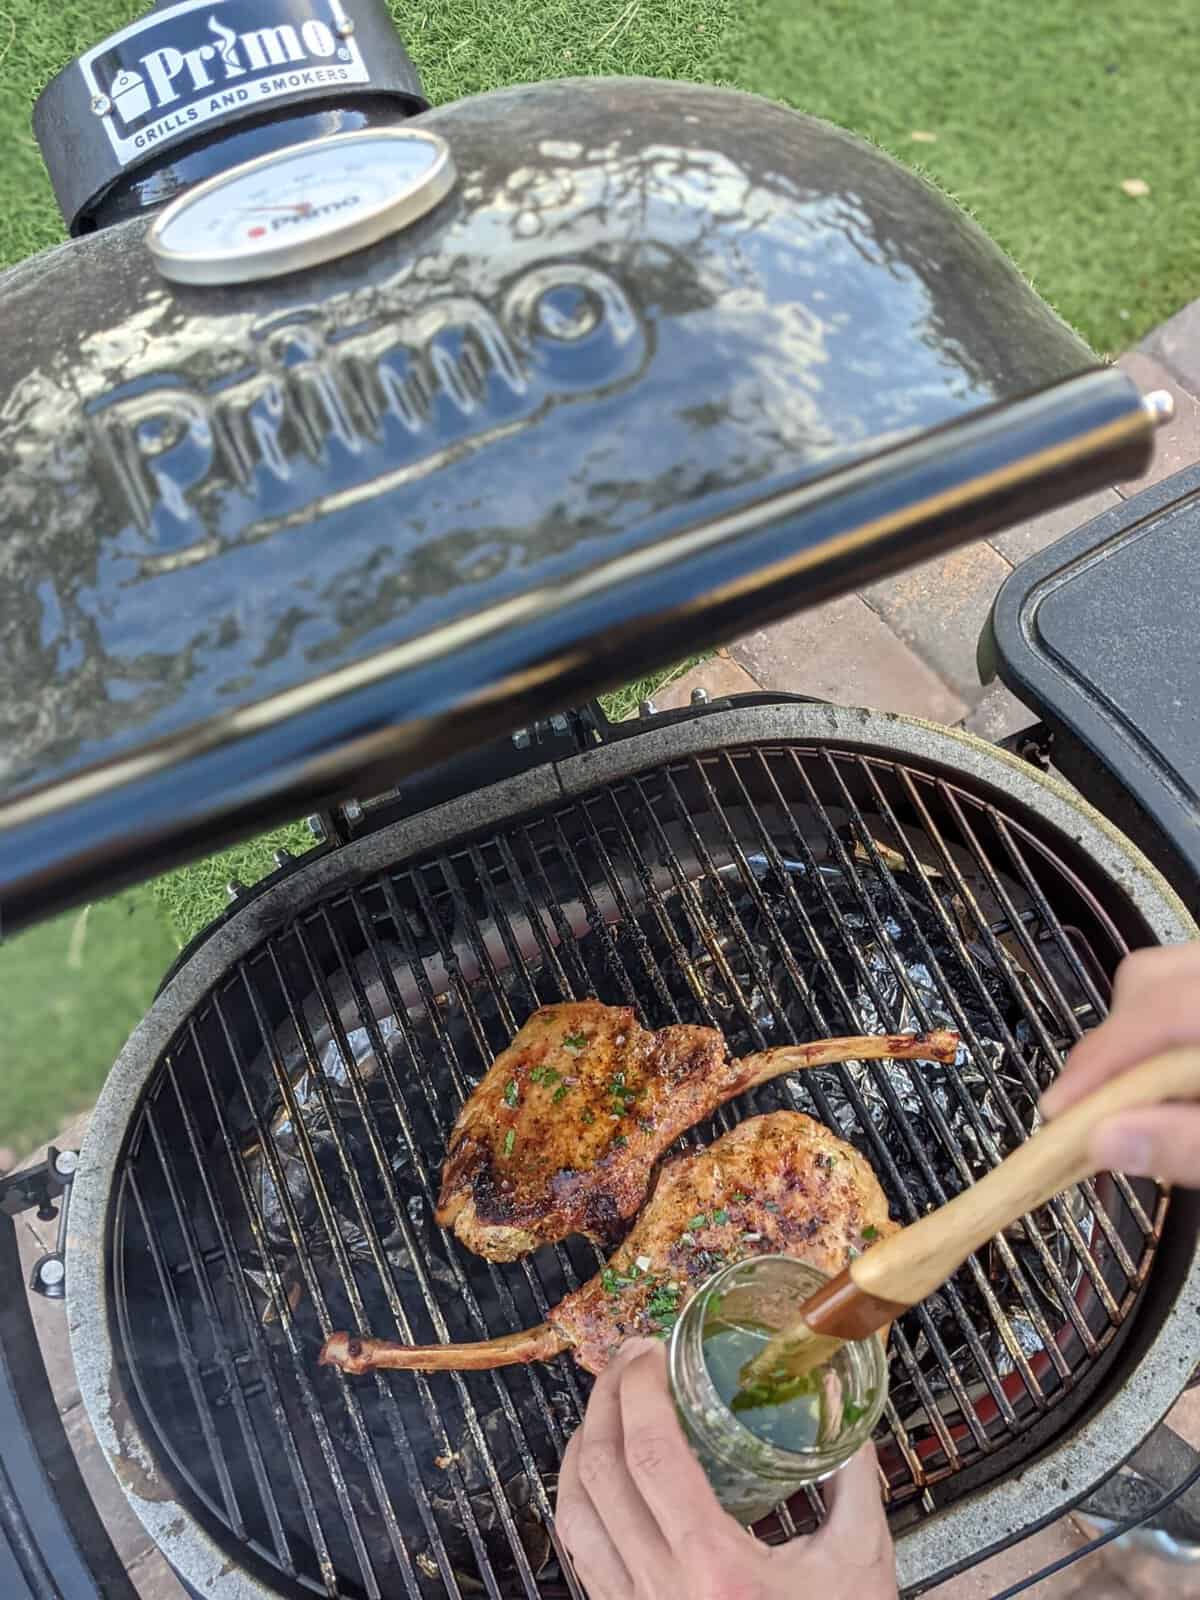 A person is expertly applying sauce to two grilled tomahawk pork chops cooking on a Primo grill, demonstrating how to use a kamado grill to achieve perfect flavor and sear.